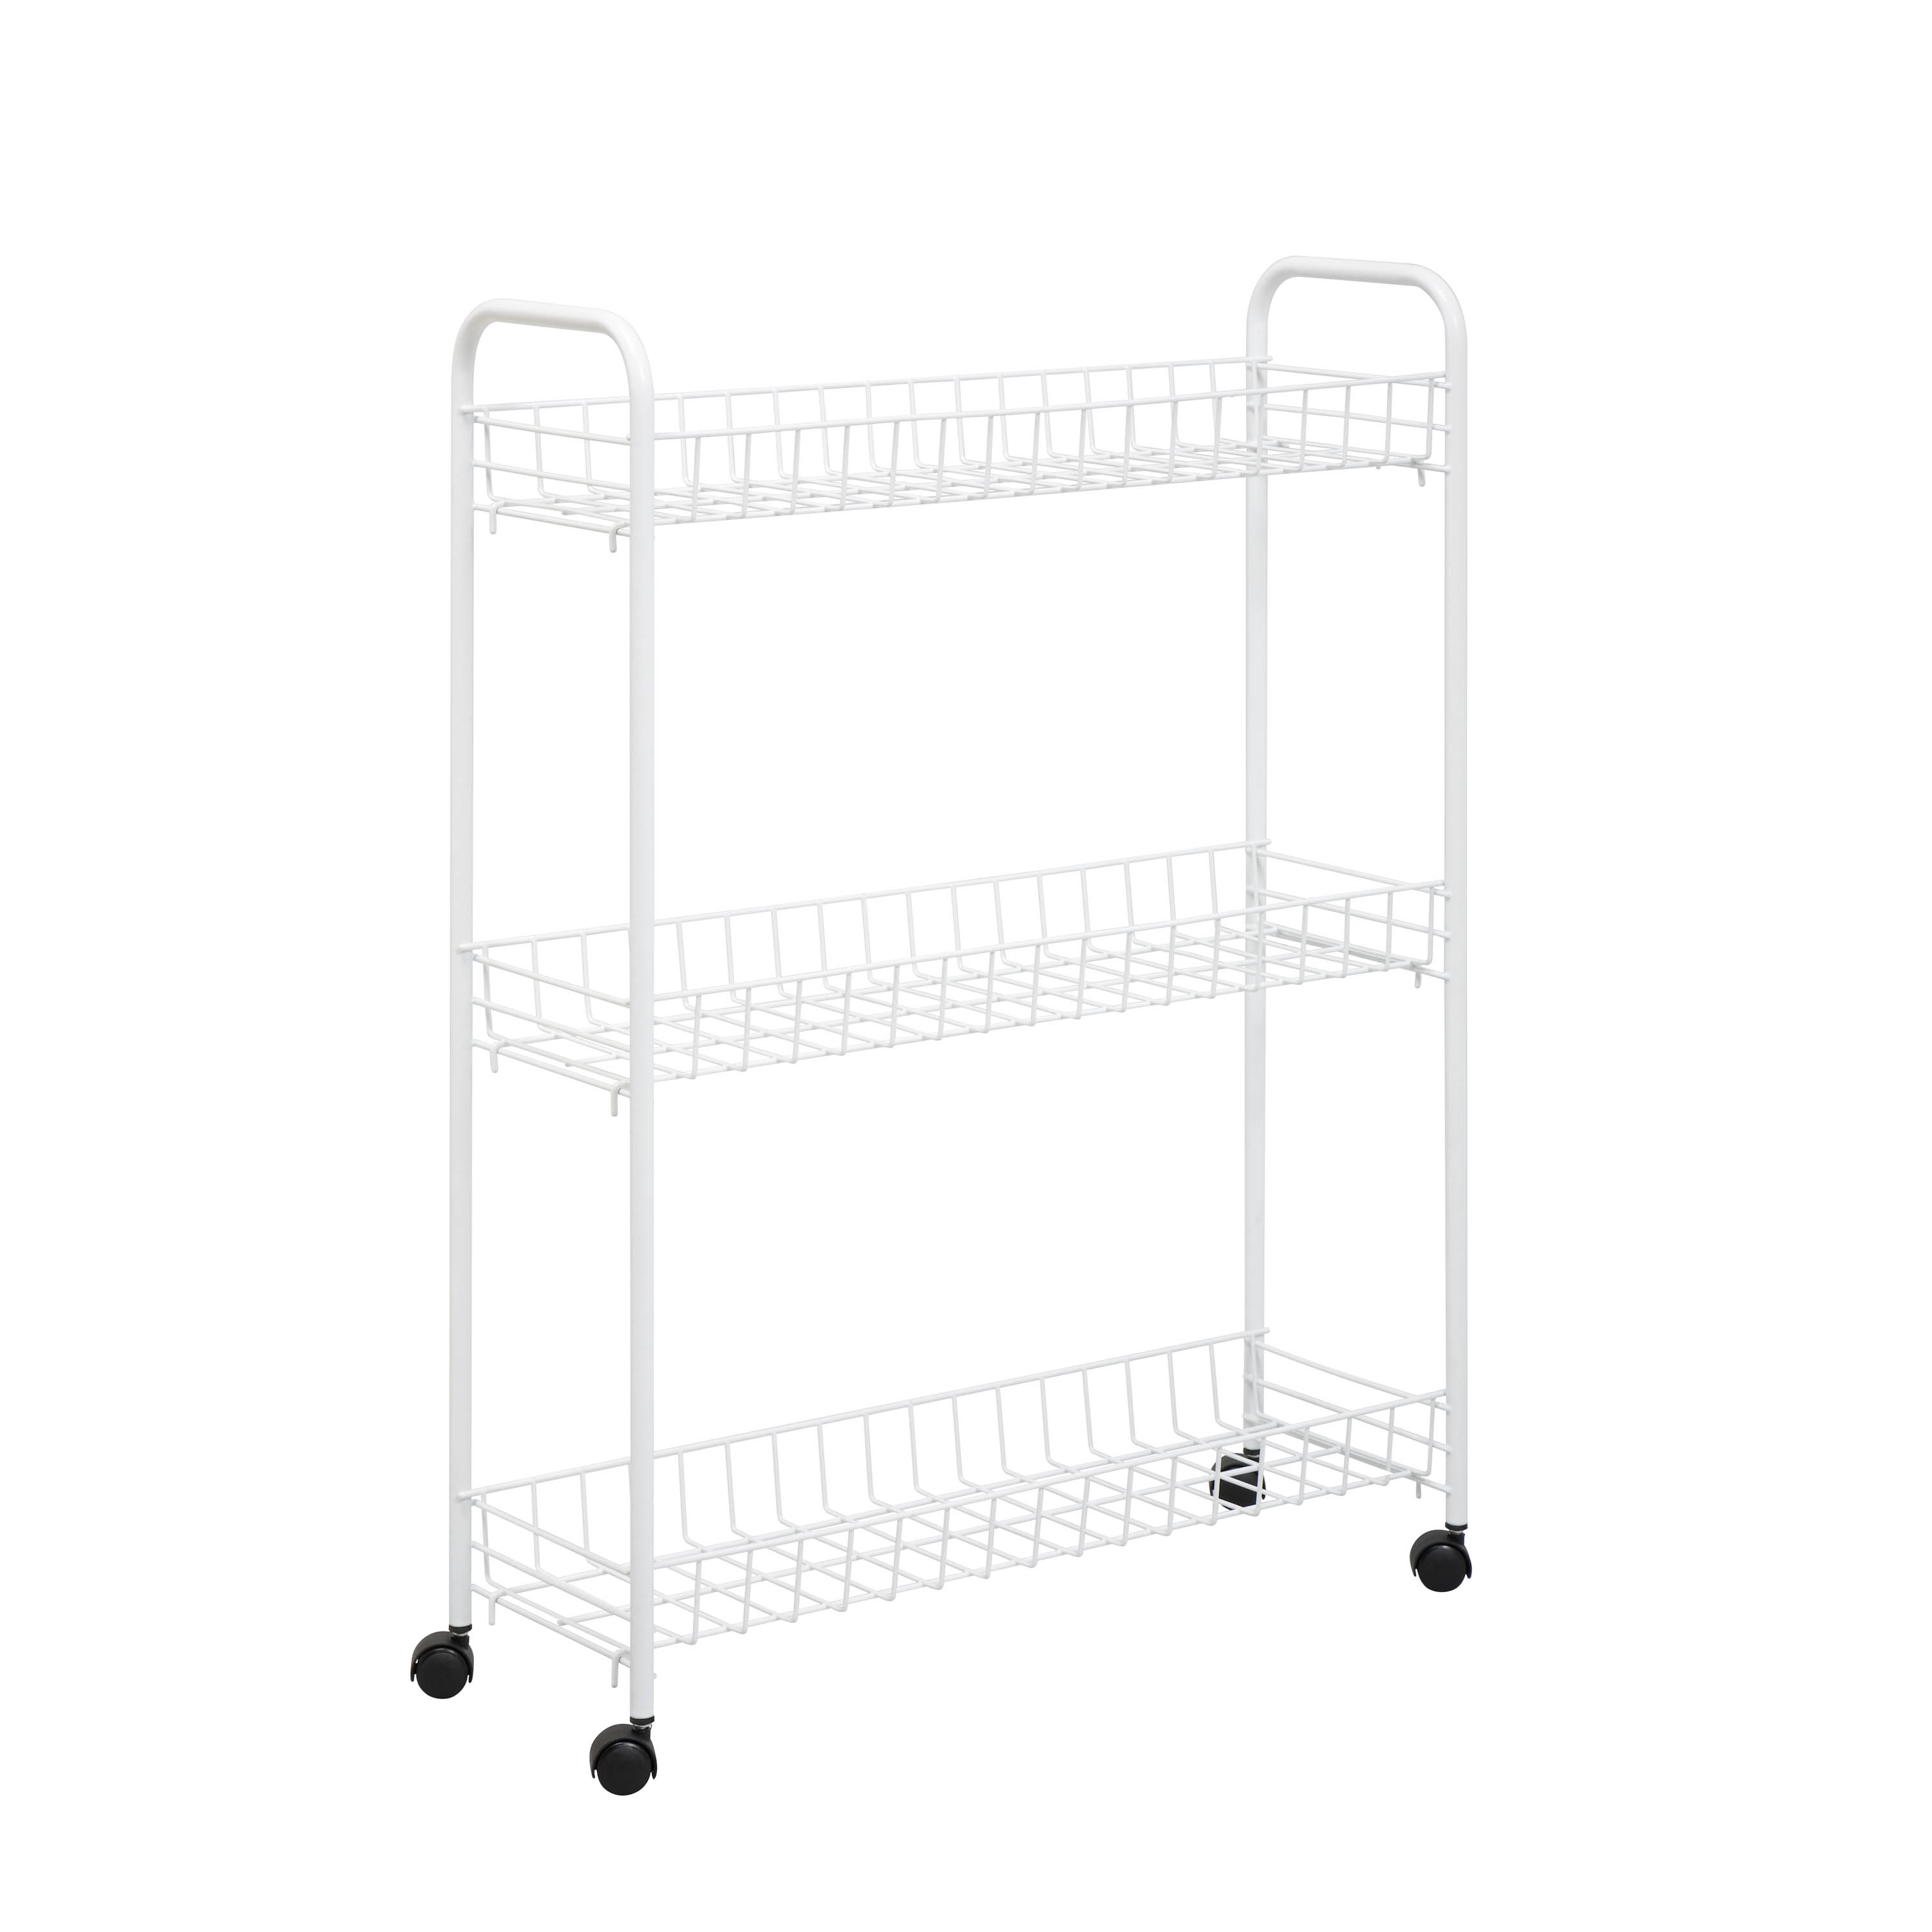 Honey-Can-Do 3-Tier Rolling Steel Storage Cart, White - image 1 of 7